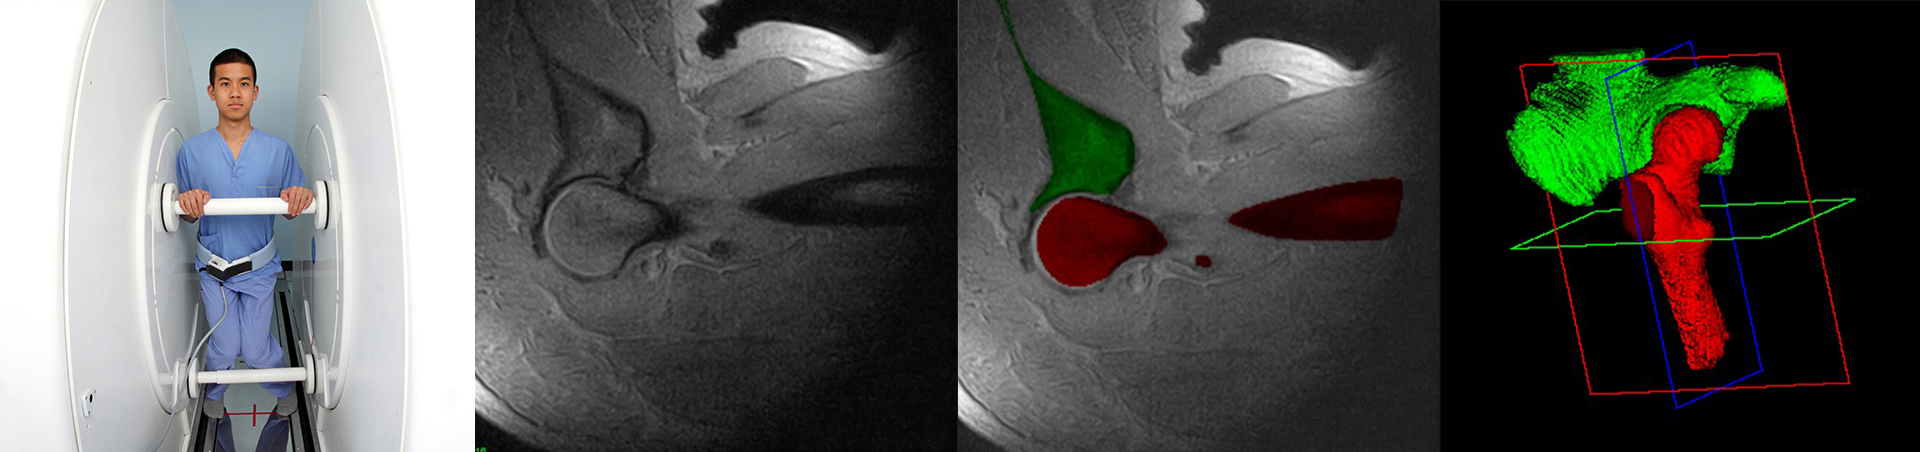 knee bent scan and images